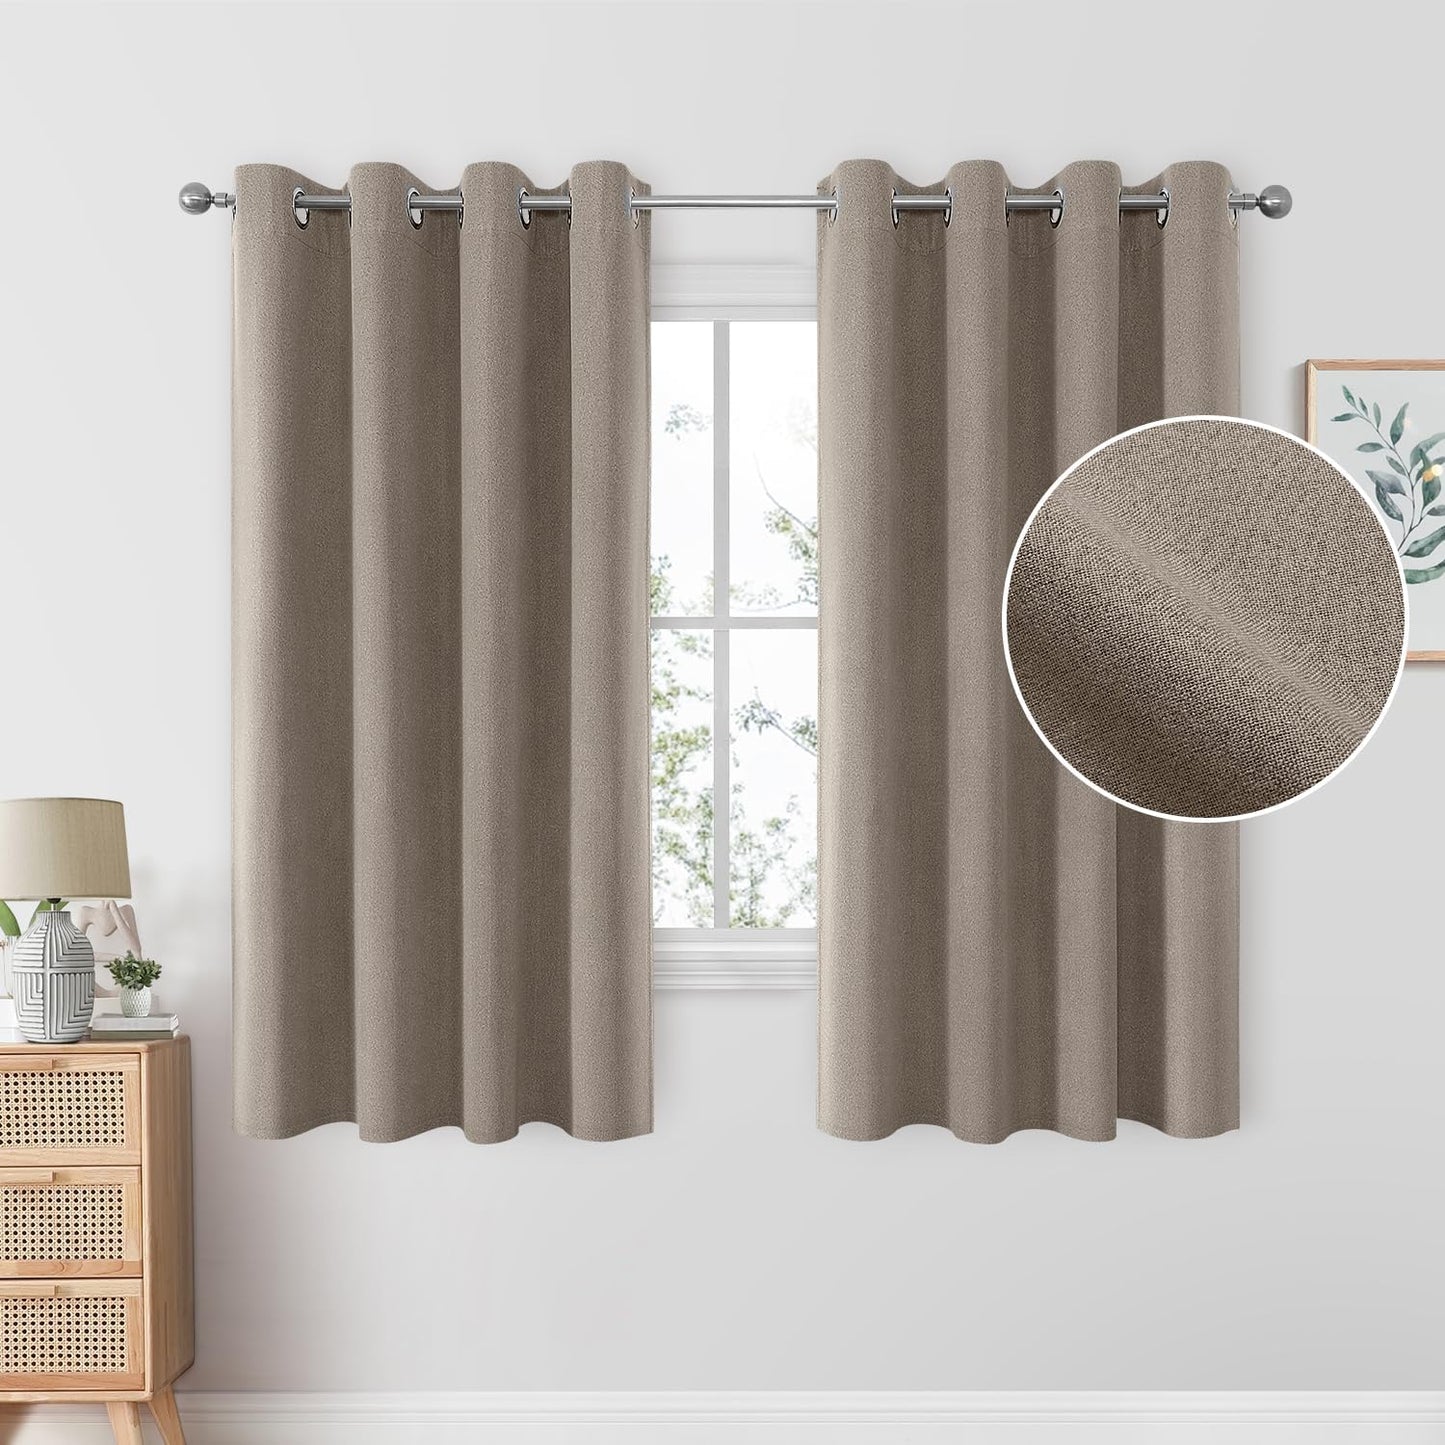 HOMEIDEAS 100% Blush Pink Linen Blackout Curtains for Bedroom, 52 X 84 Inch Room Darkening Curtains for Living, Faux Linen Thermal Insulated Full Black Out Grommet Window Curtains/Drapes  HOMEIDEAS Natural W52" X L63" 